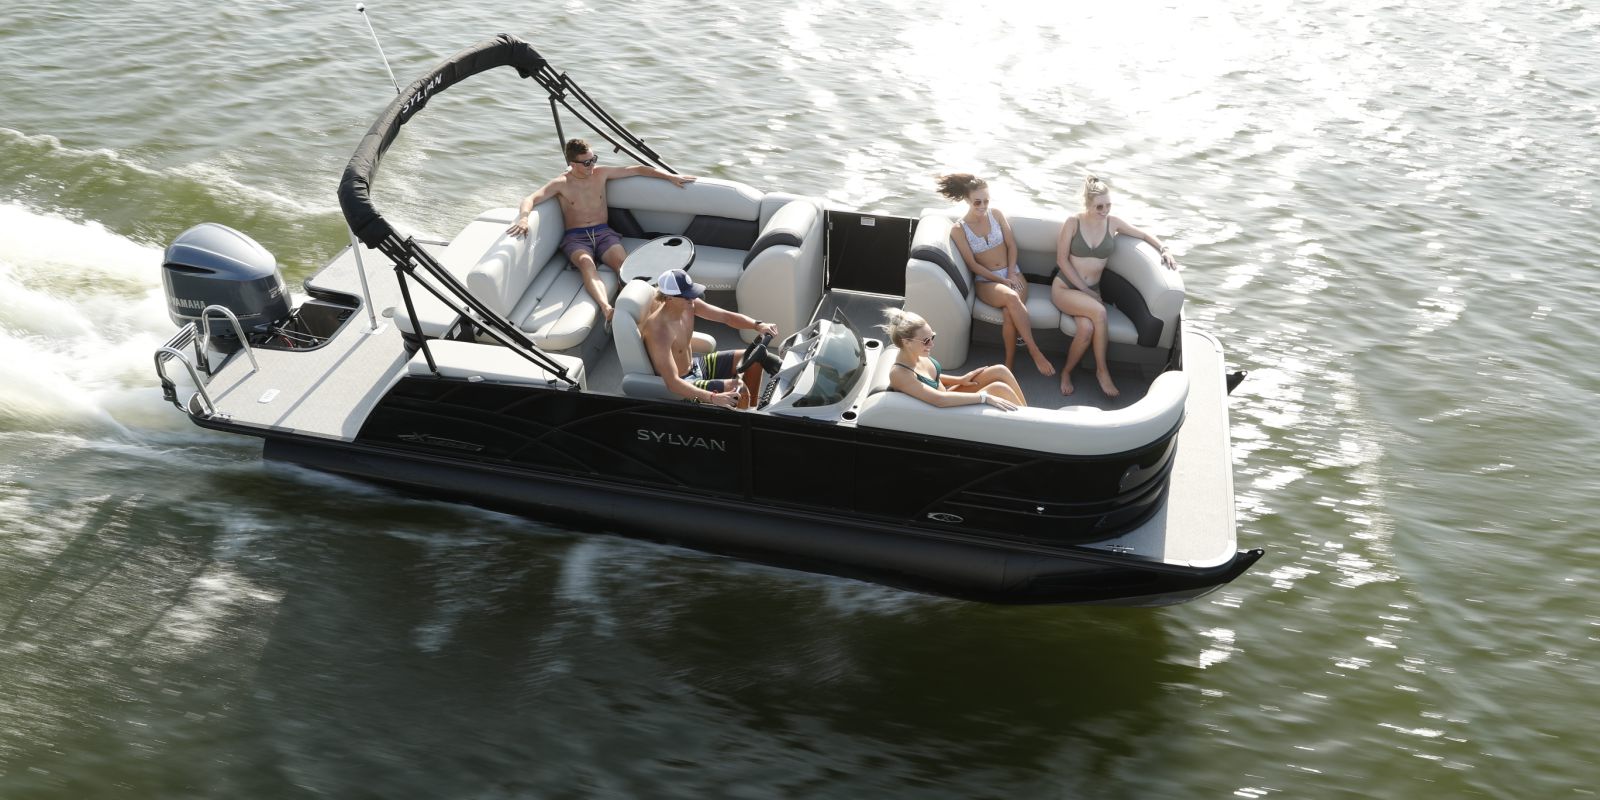 Sylvan Marine Pontoon Boat - Life is great out on the water